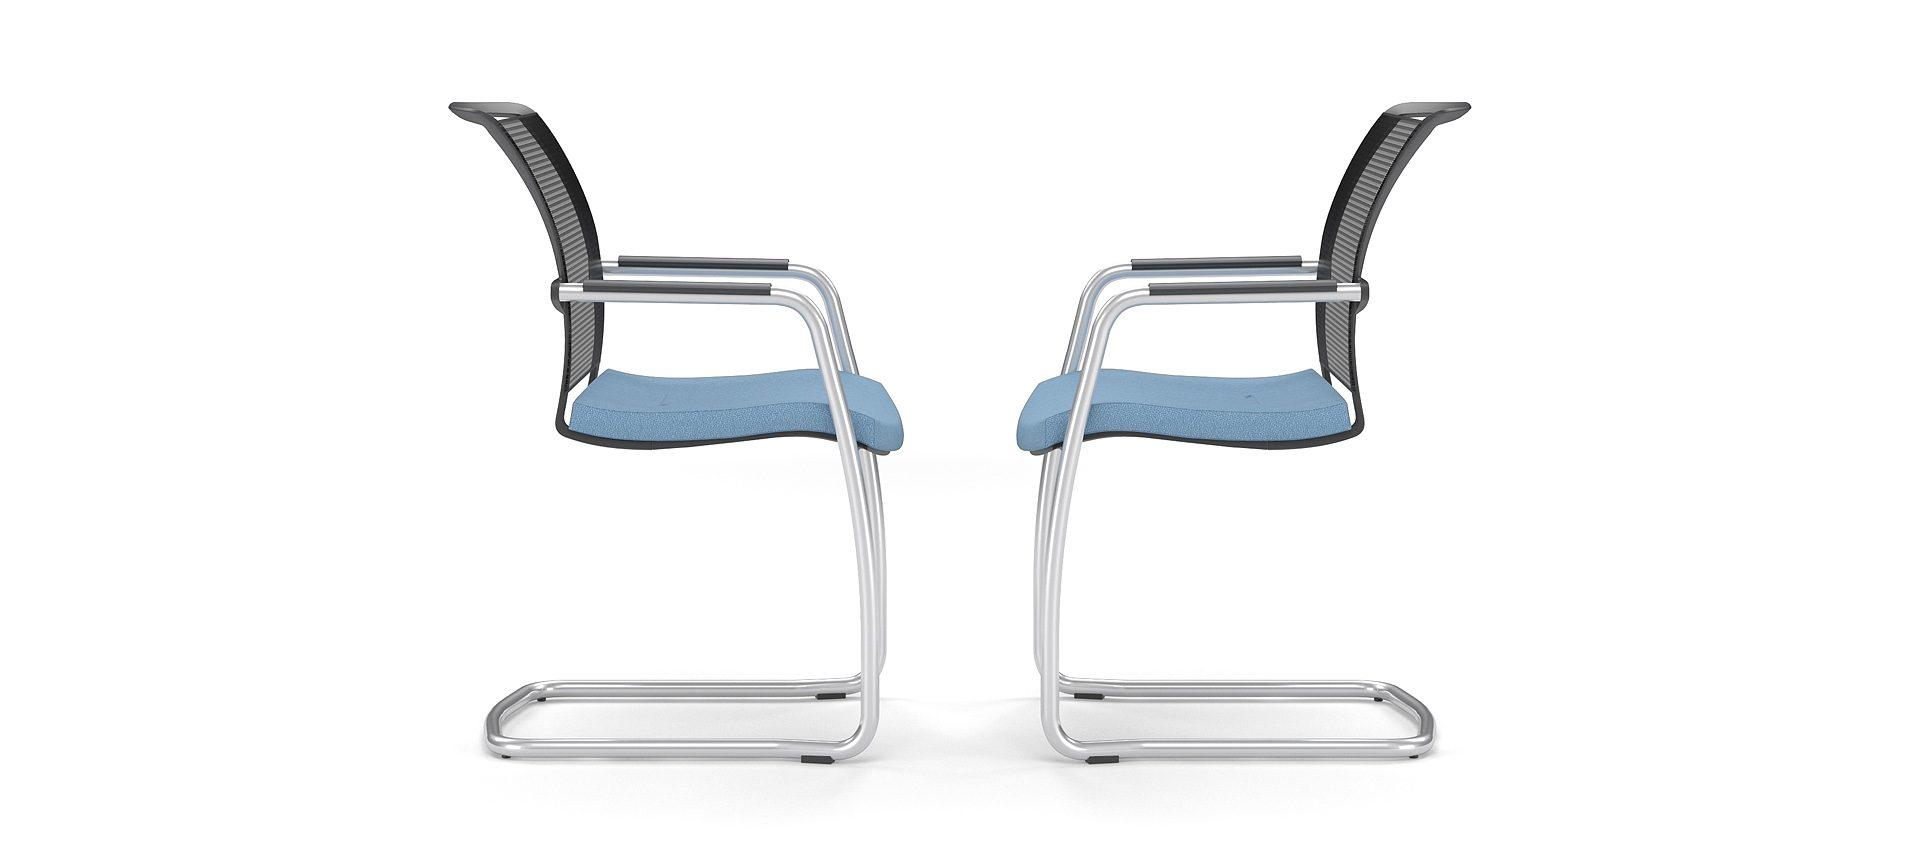 Pair of Diva Cantilever Meeting chairs with black mesh back, chromed frame and blue upholstered seatpad